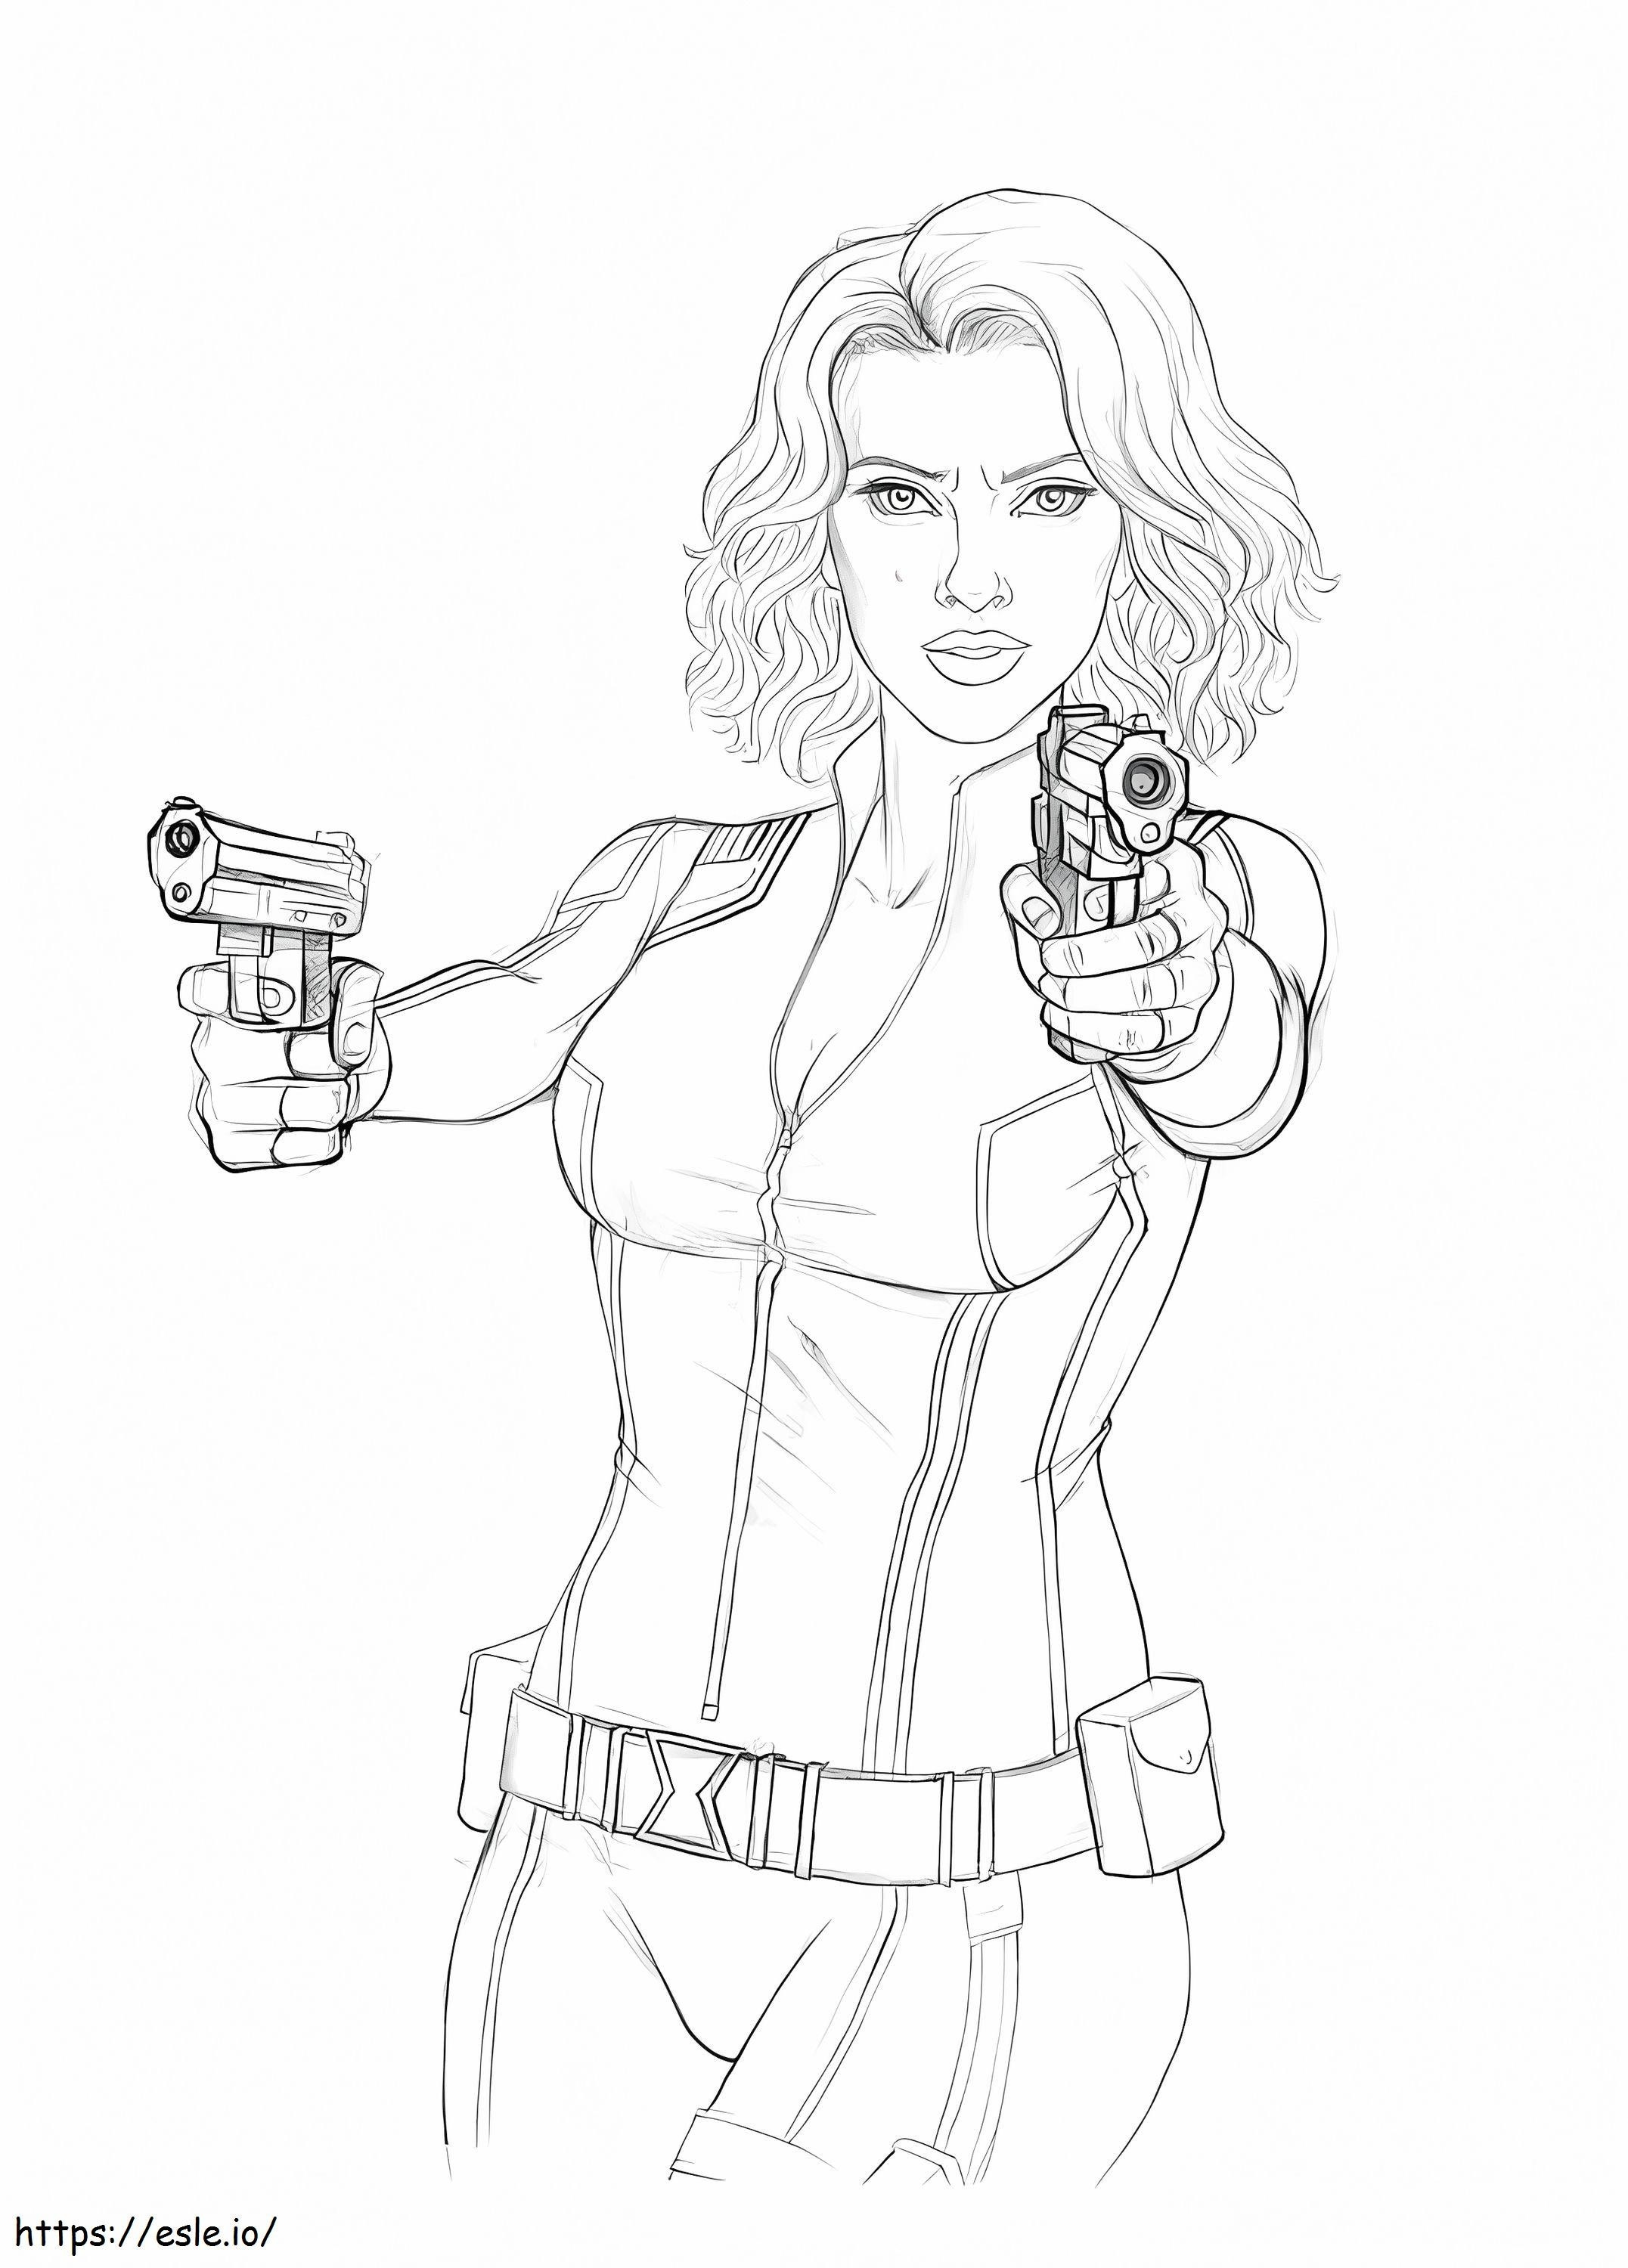 Black Widow 12 coloring page